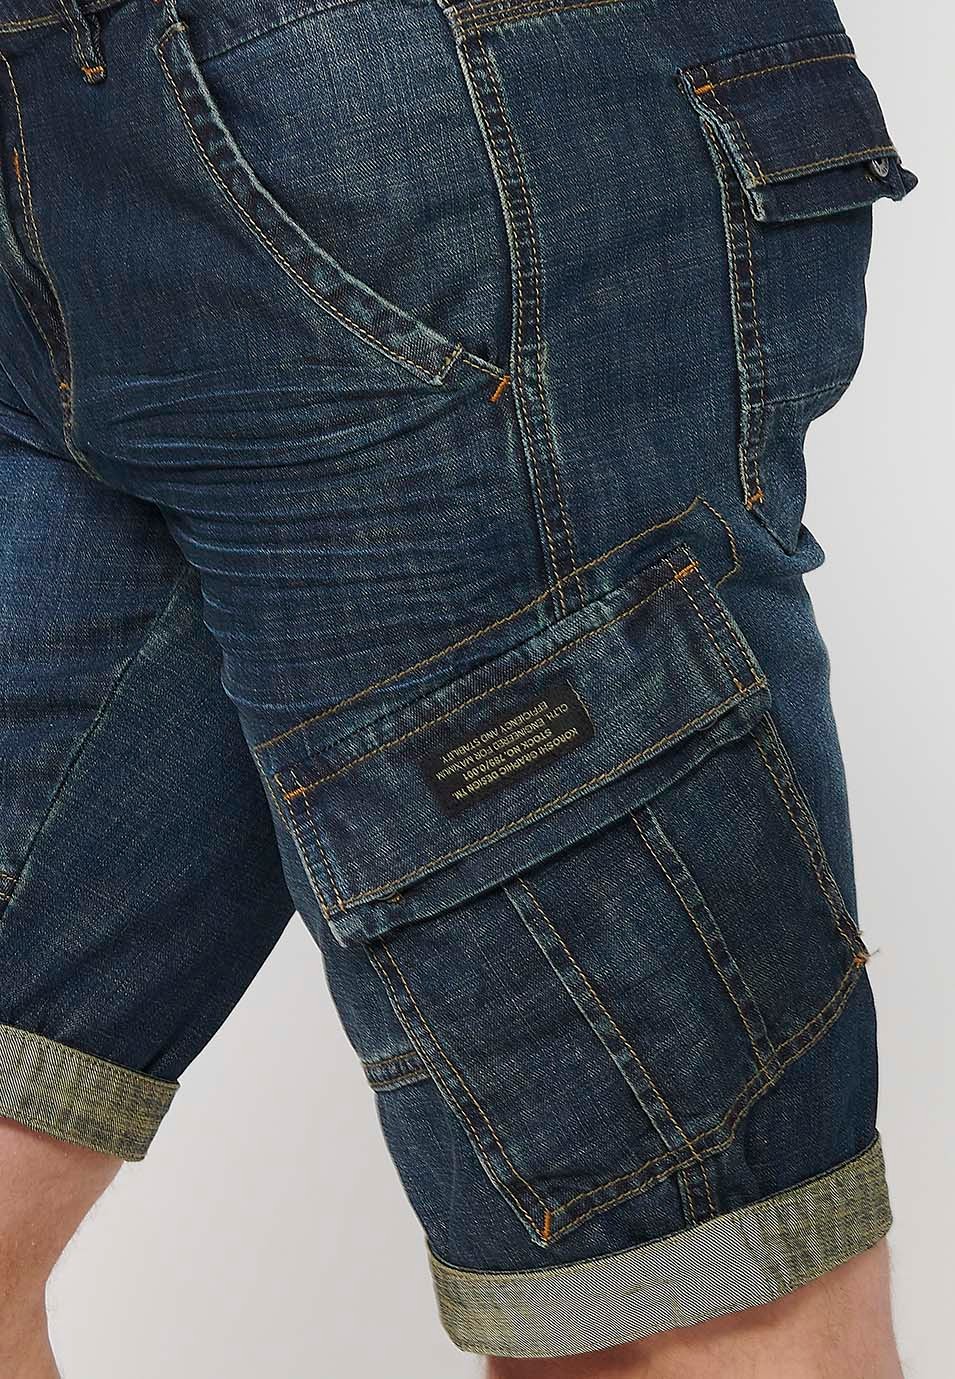 Blue Denim Bermuda Shorts with Side Cargo Pockets and Front Closure with Zipper and Button for Men 8